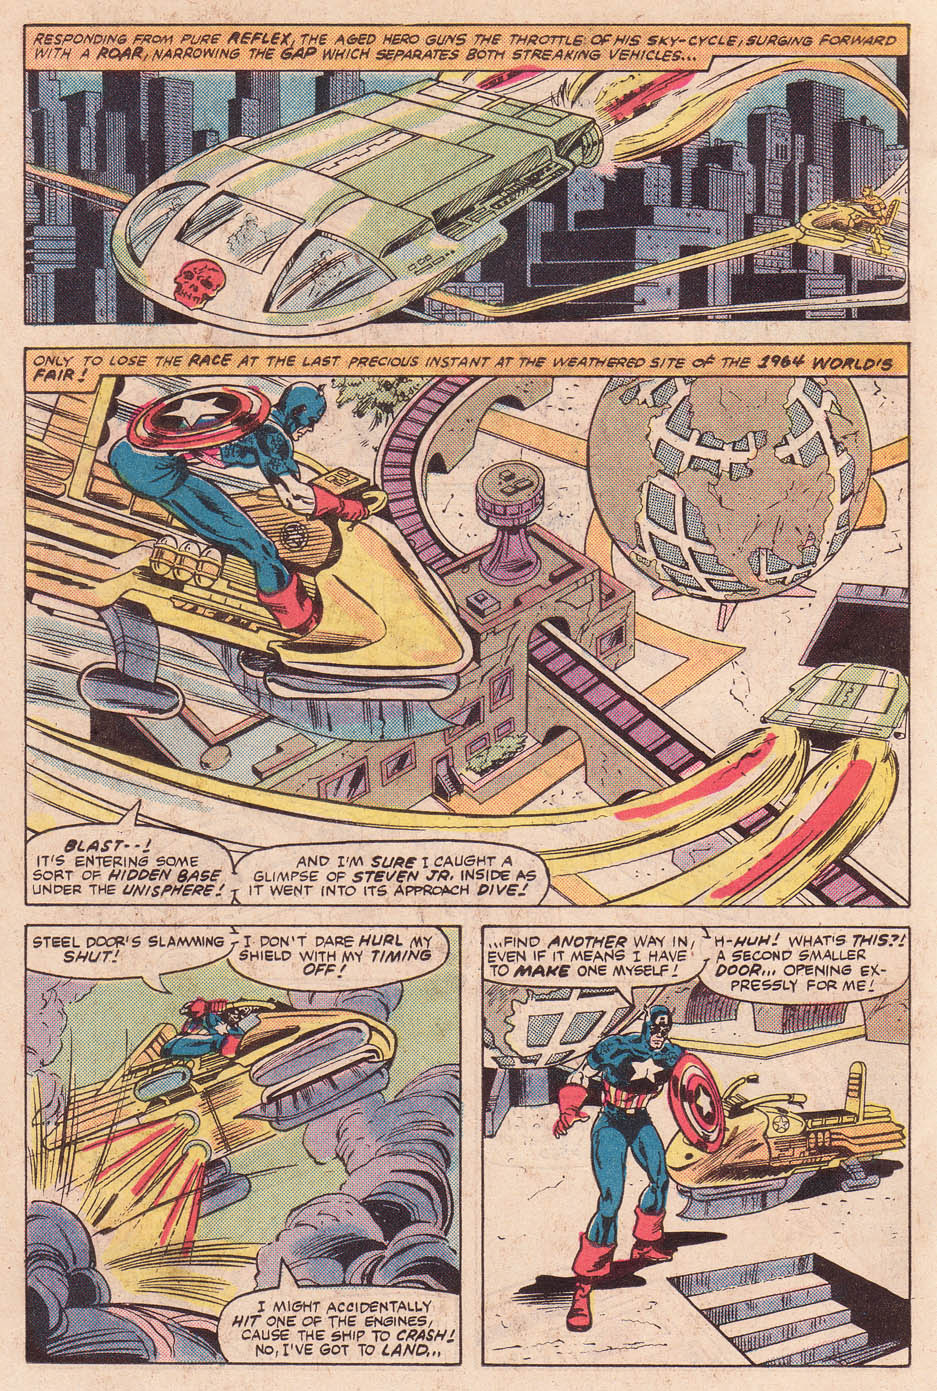 What If? (1977) issue 38 - Daredevil and Captain America - Page 22